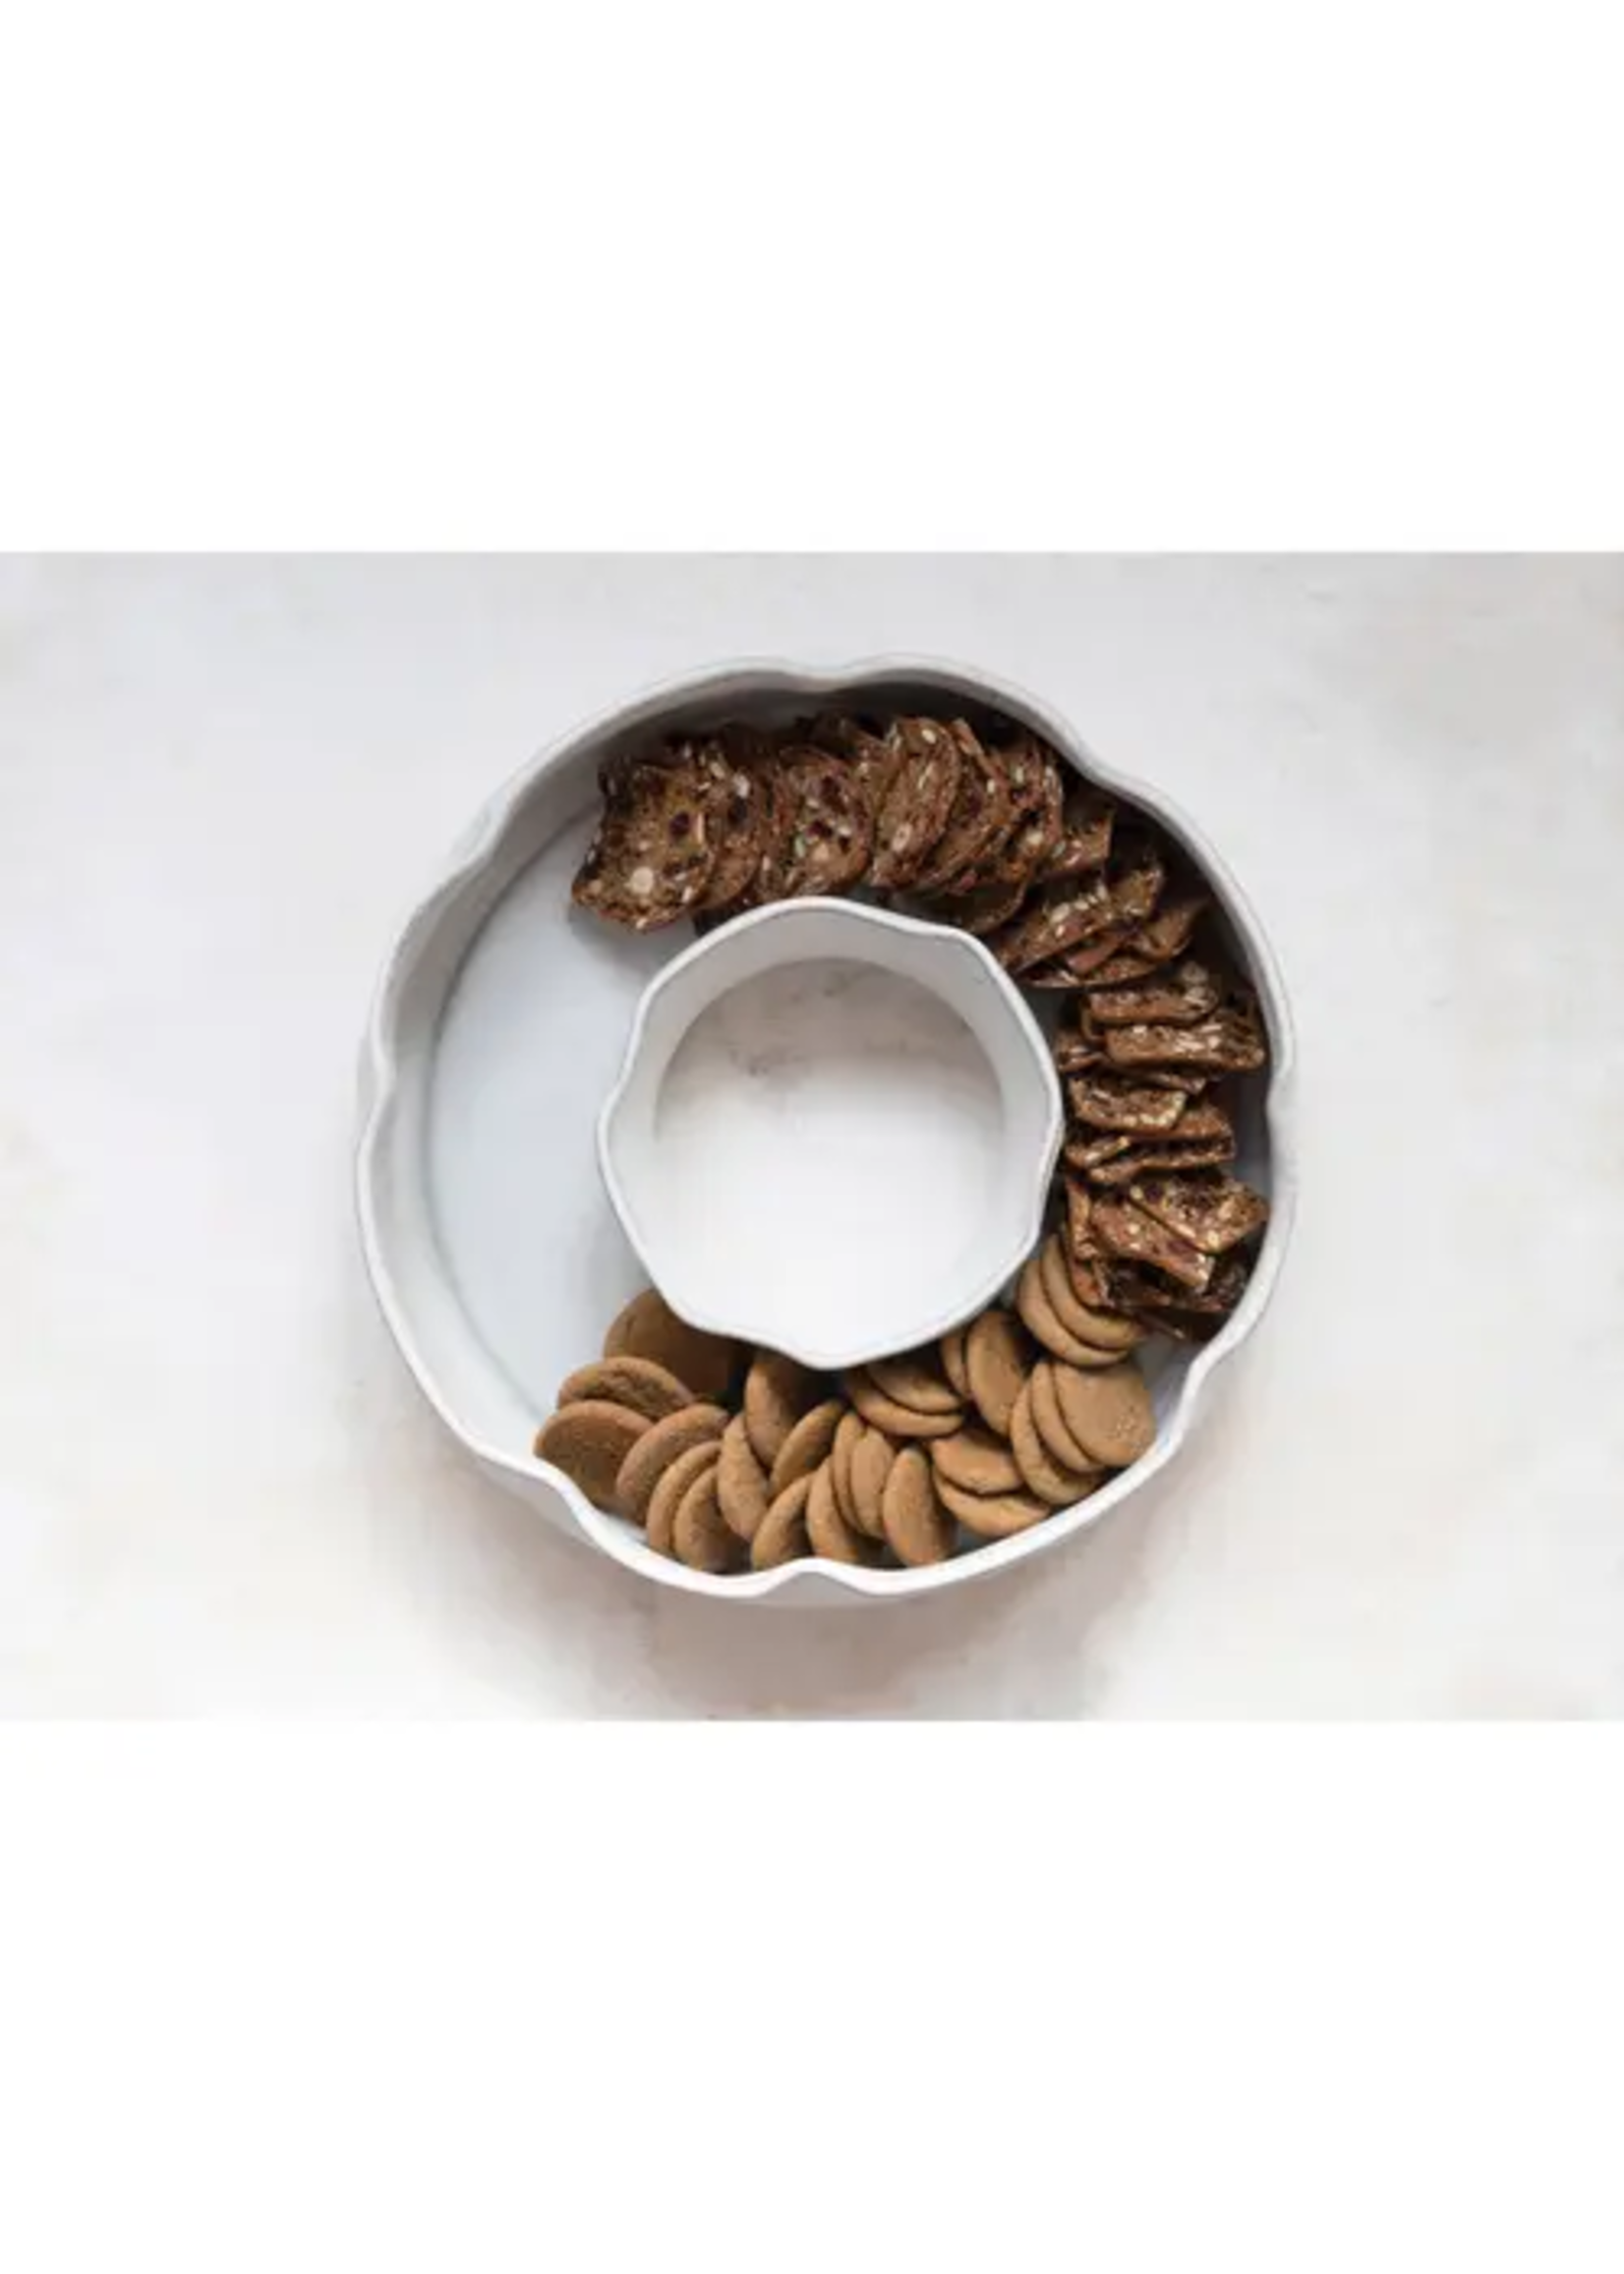 Stoneware Ring Shaped Serving Dish with 2 Sections